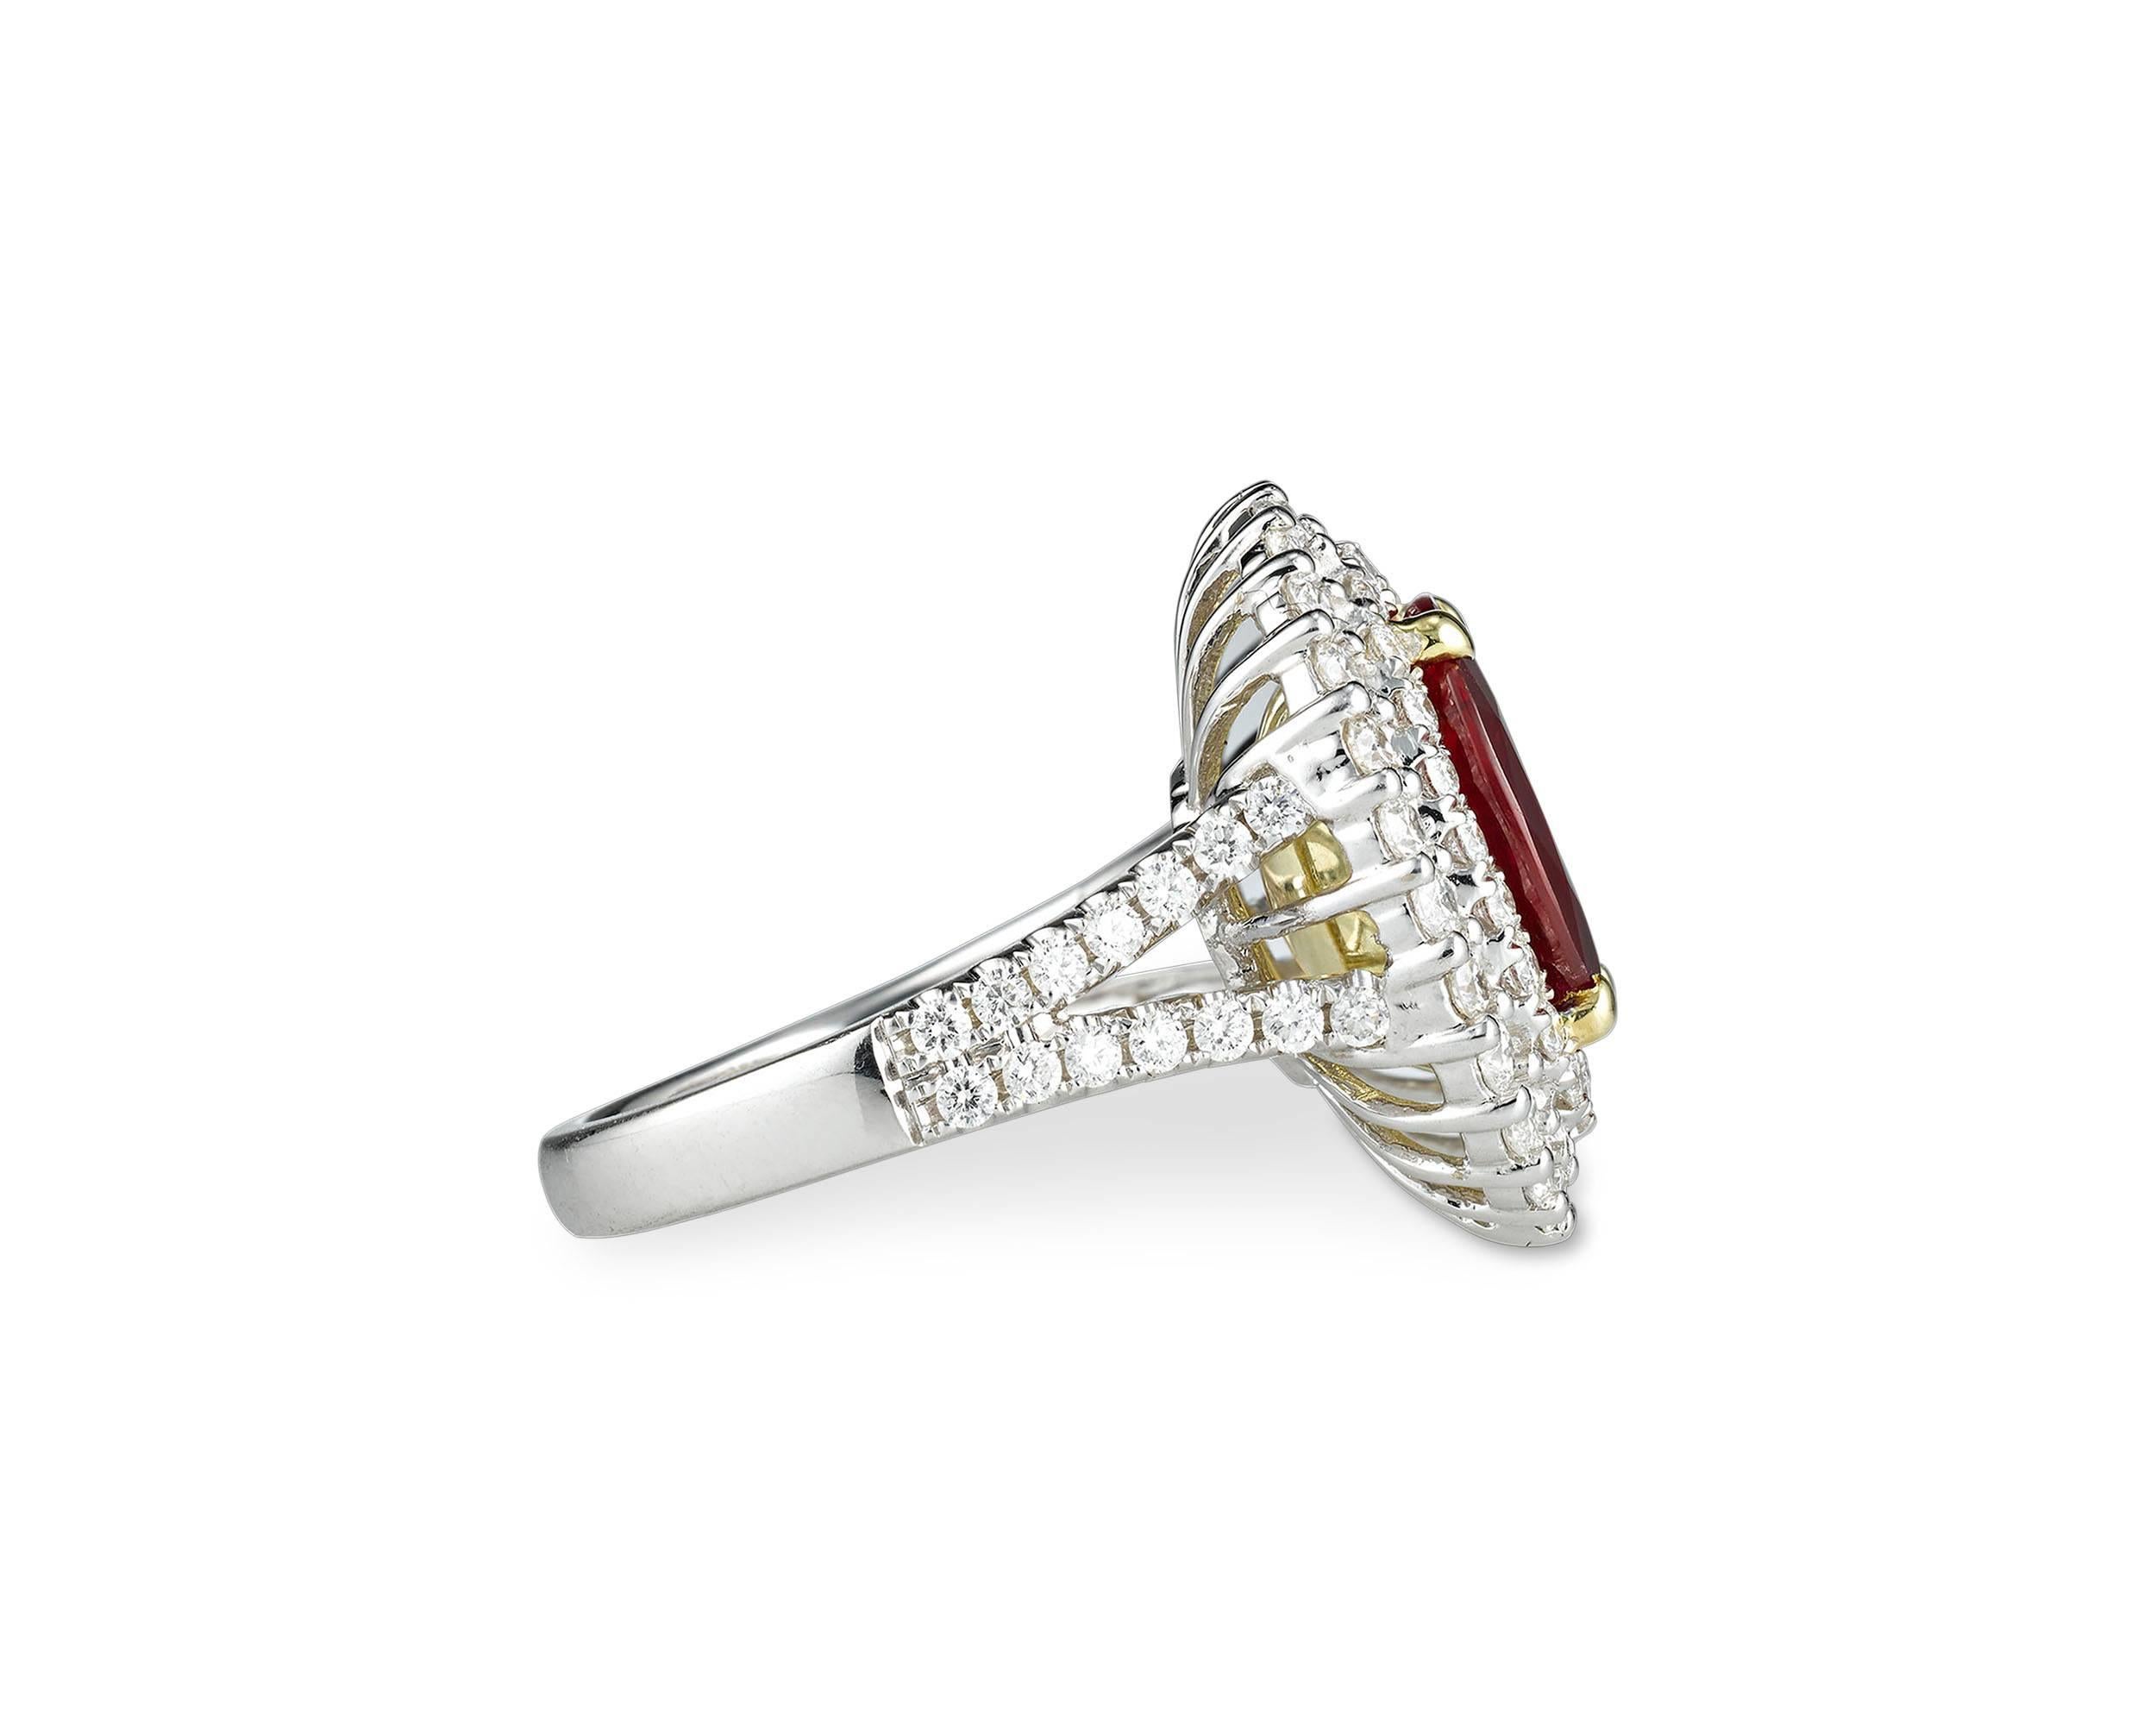 A brilliant 3.95-carat oval ruby radiates at the center of this elegant ring. The surrounding white diamonds, weighing 1.53 total carats, add to the dramatic glow of the striking gemstone. The diamonds form a bold double halo around the gem and